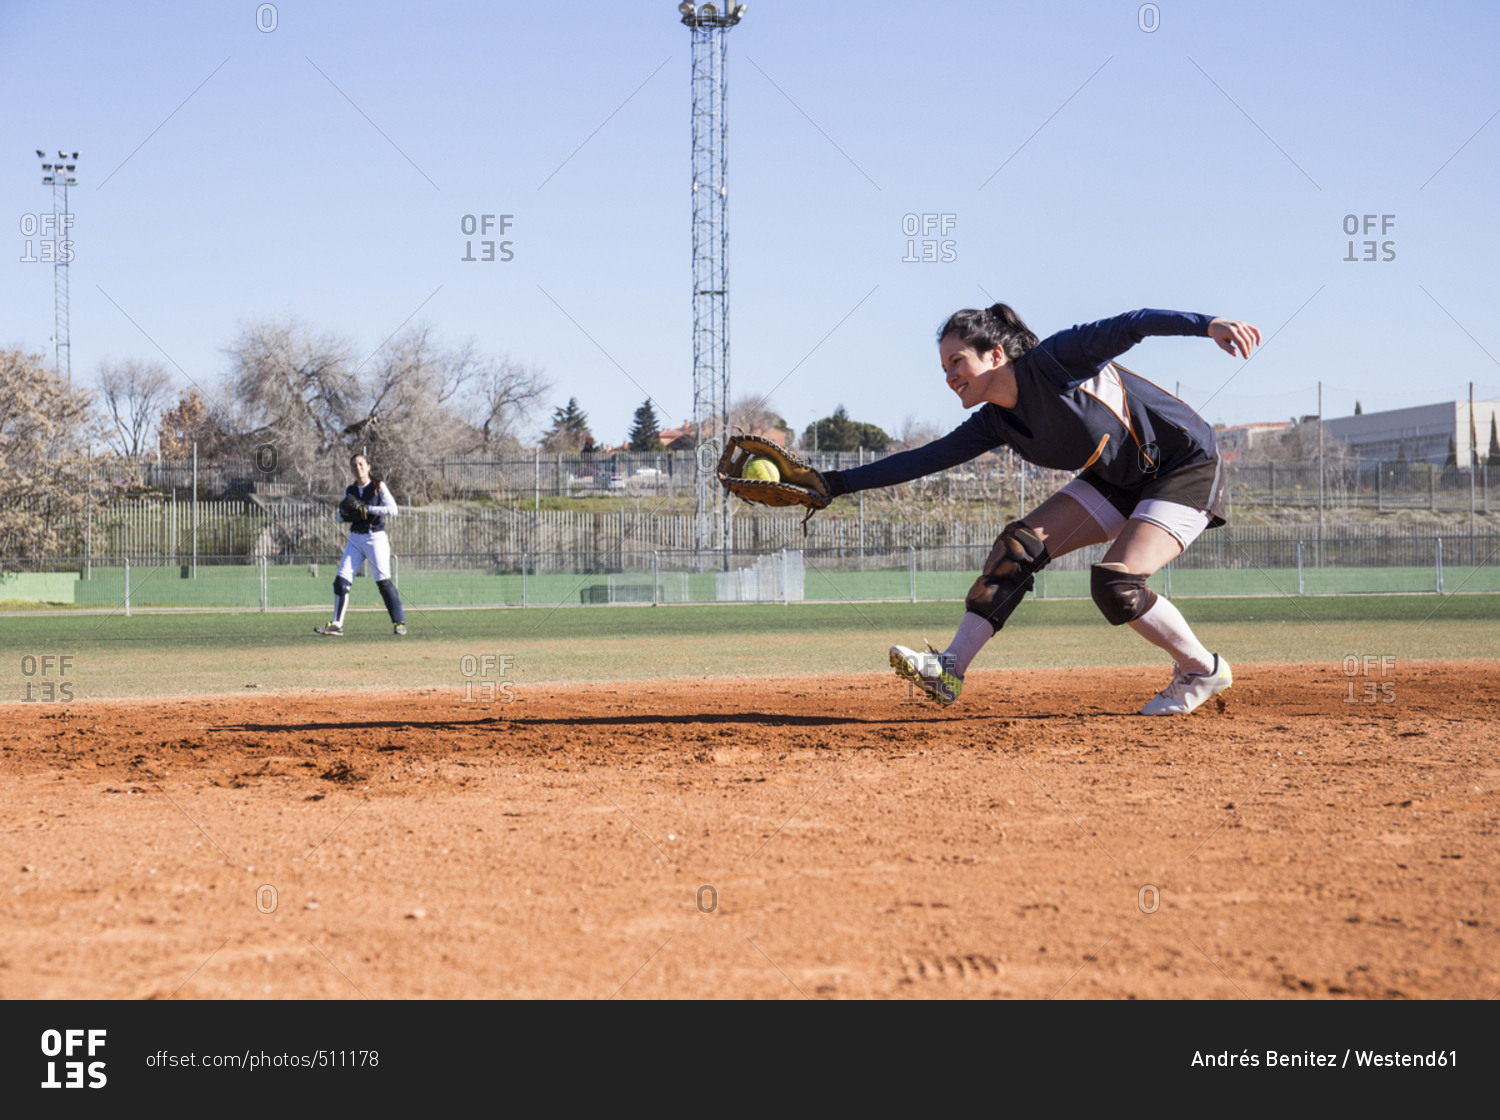 Female baseball player catching the ball during a baseball game